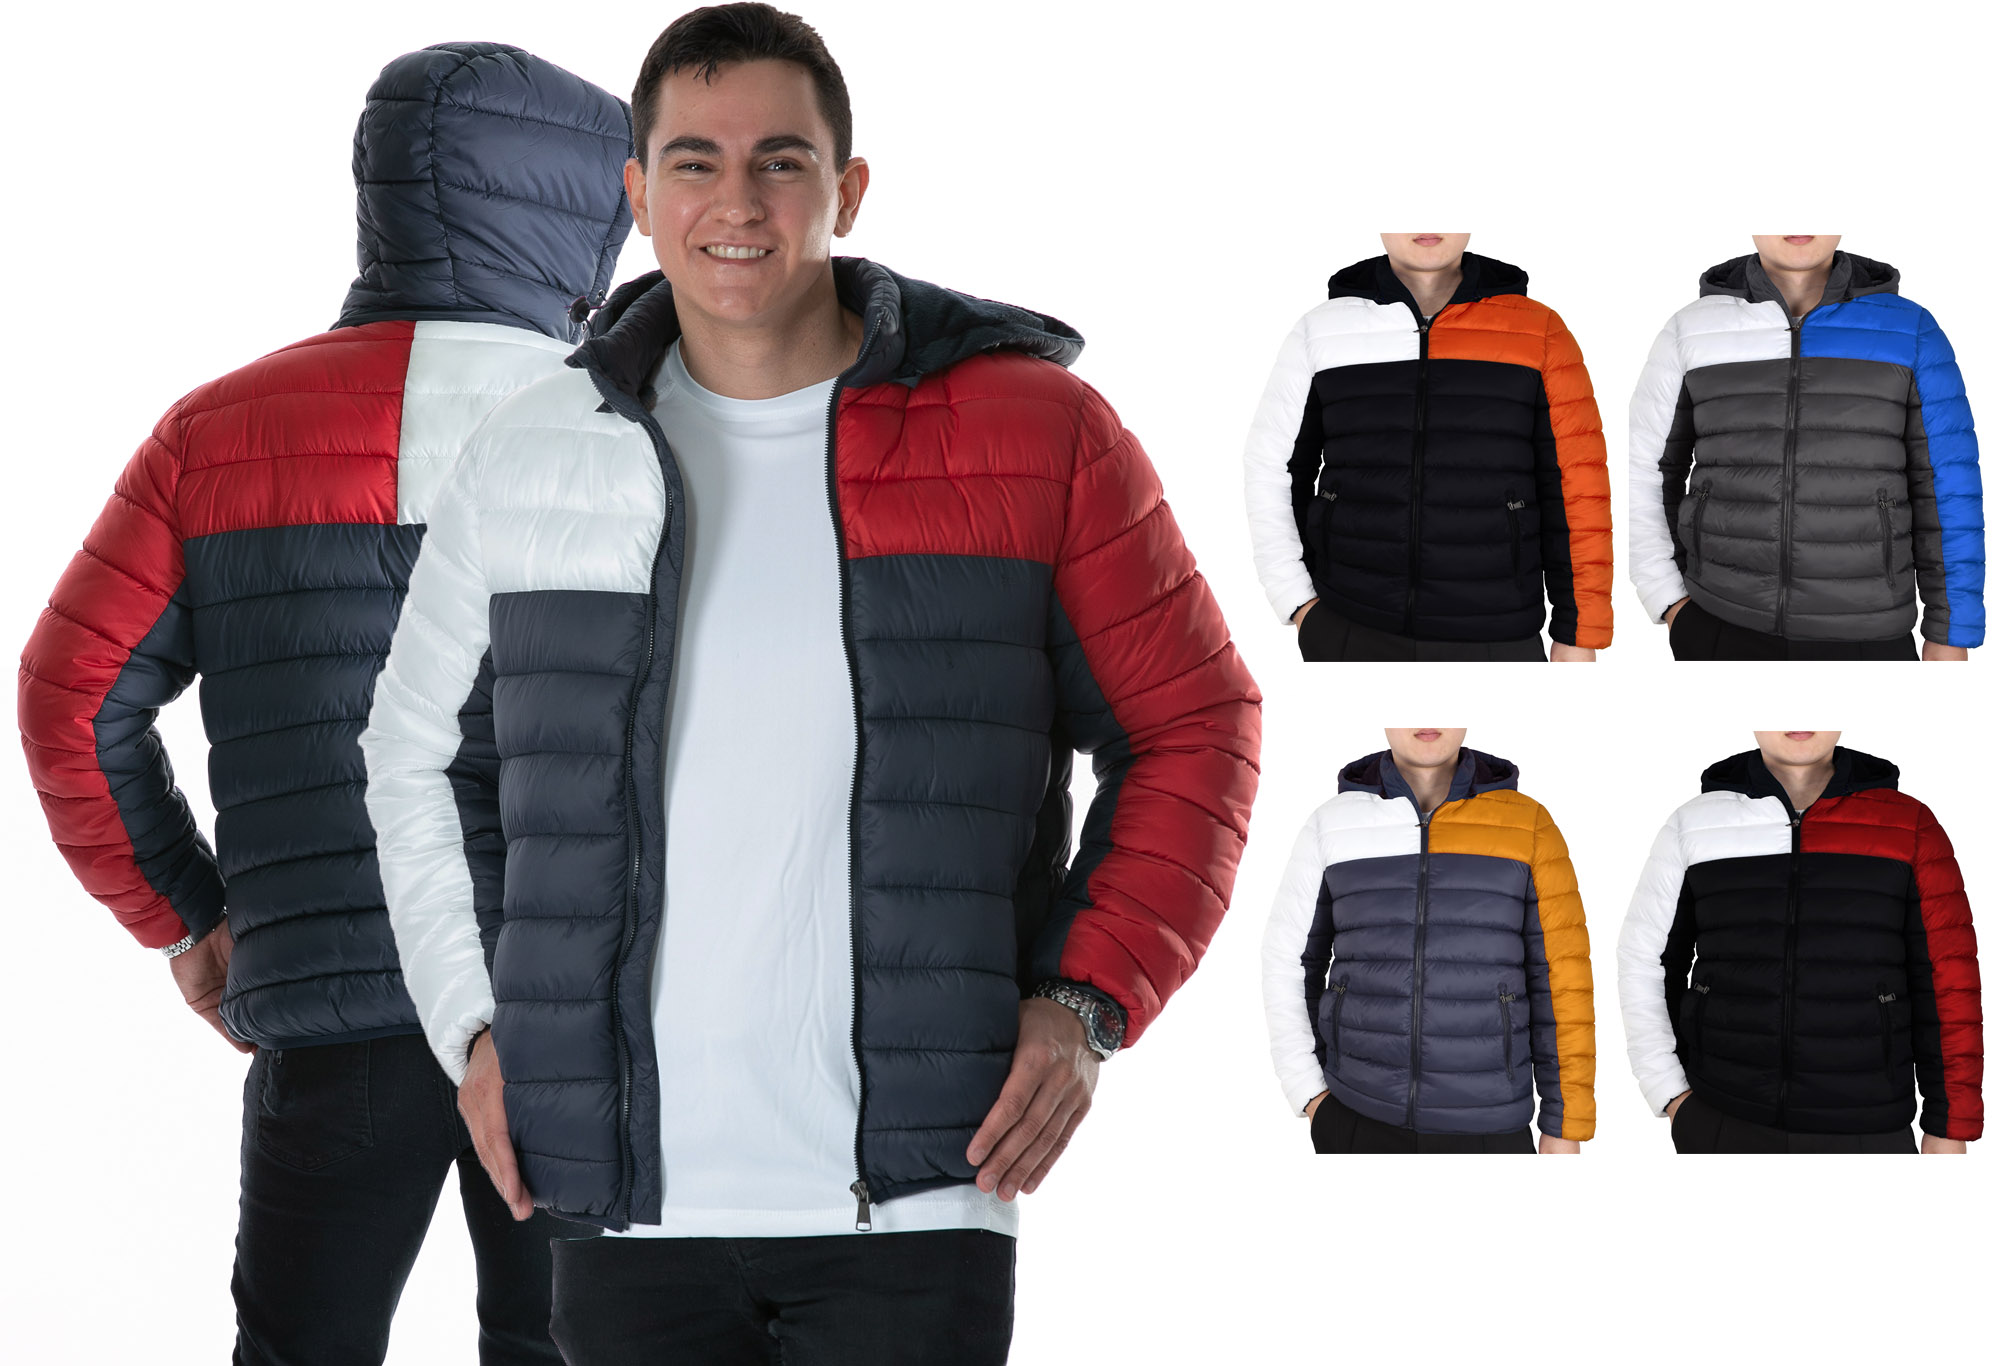 Men's Two Tone Pattern Puffer Down JACKETs w/ Sherpa Lining - Choose Your Color(s)